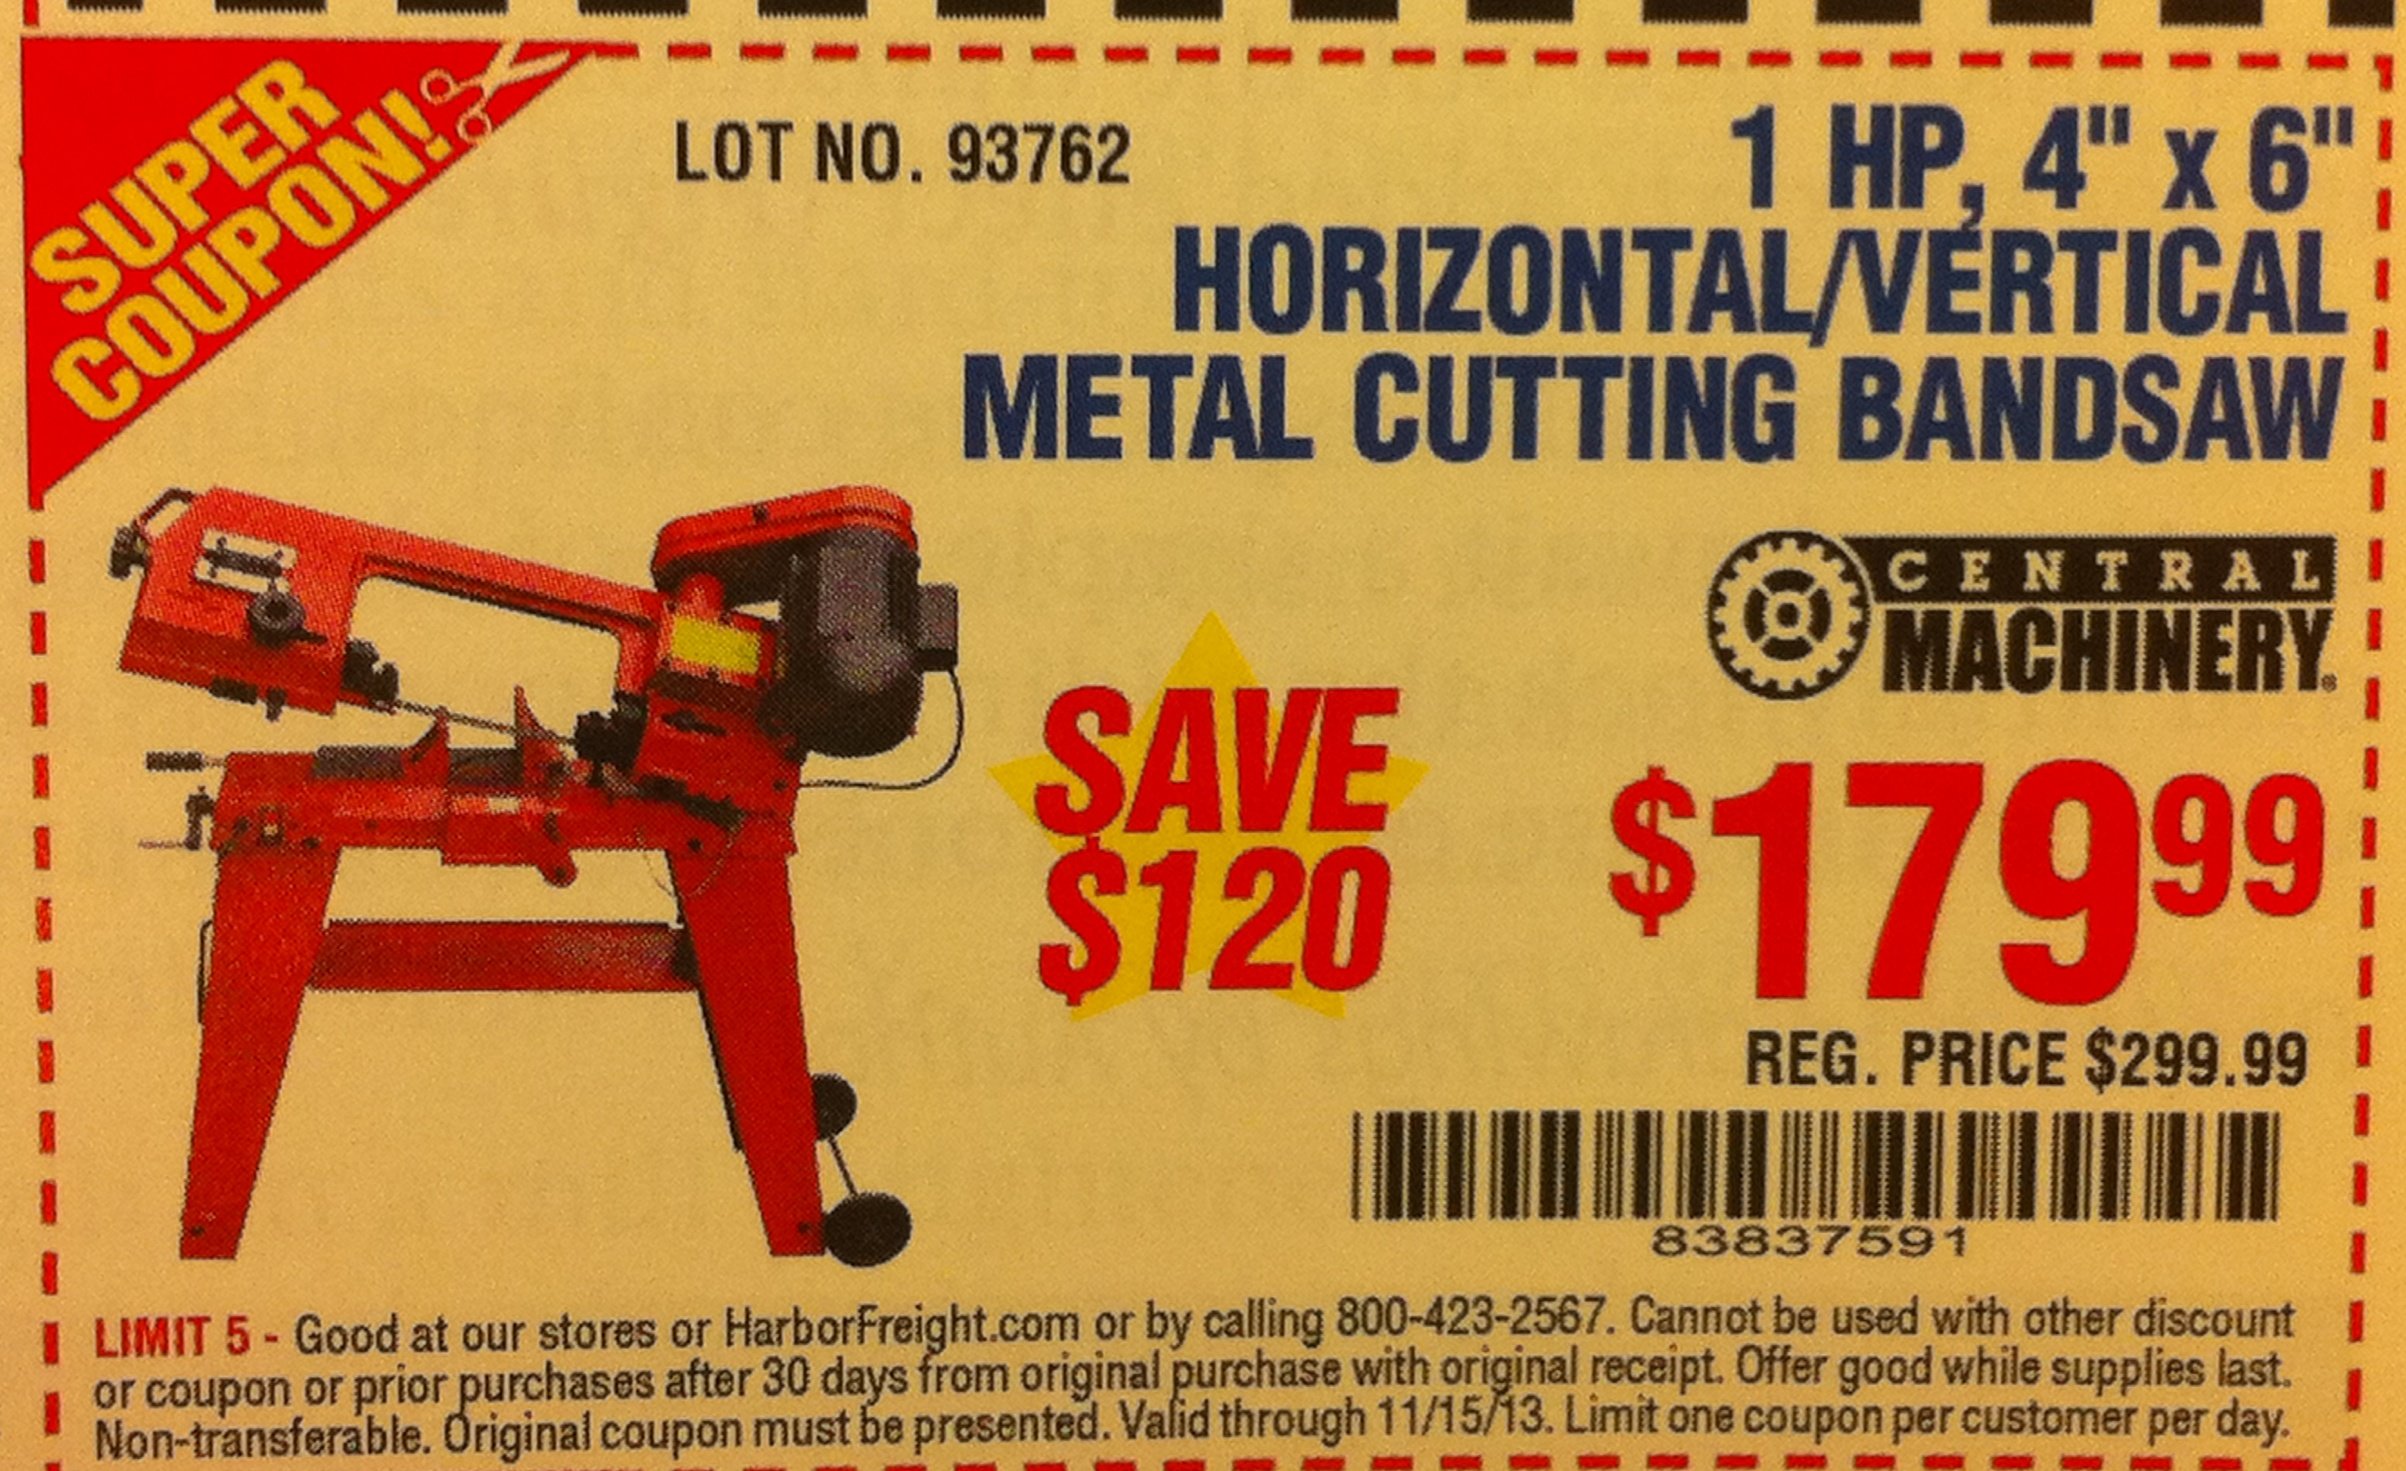 Harbor Freight Coupon Thread Page 452 Slickdeals Net